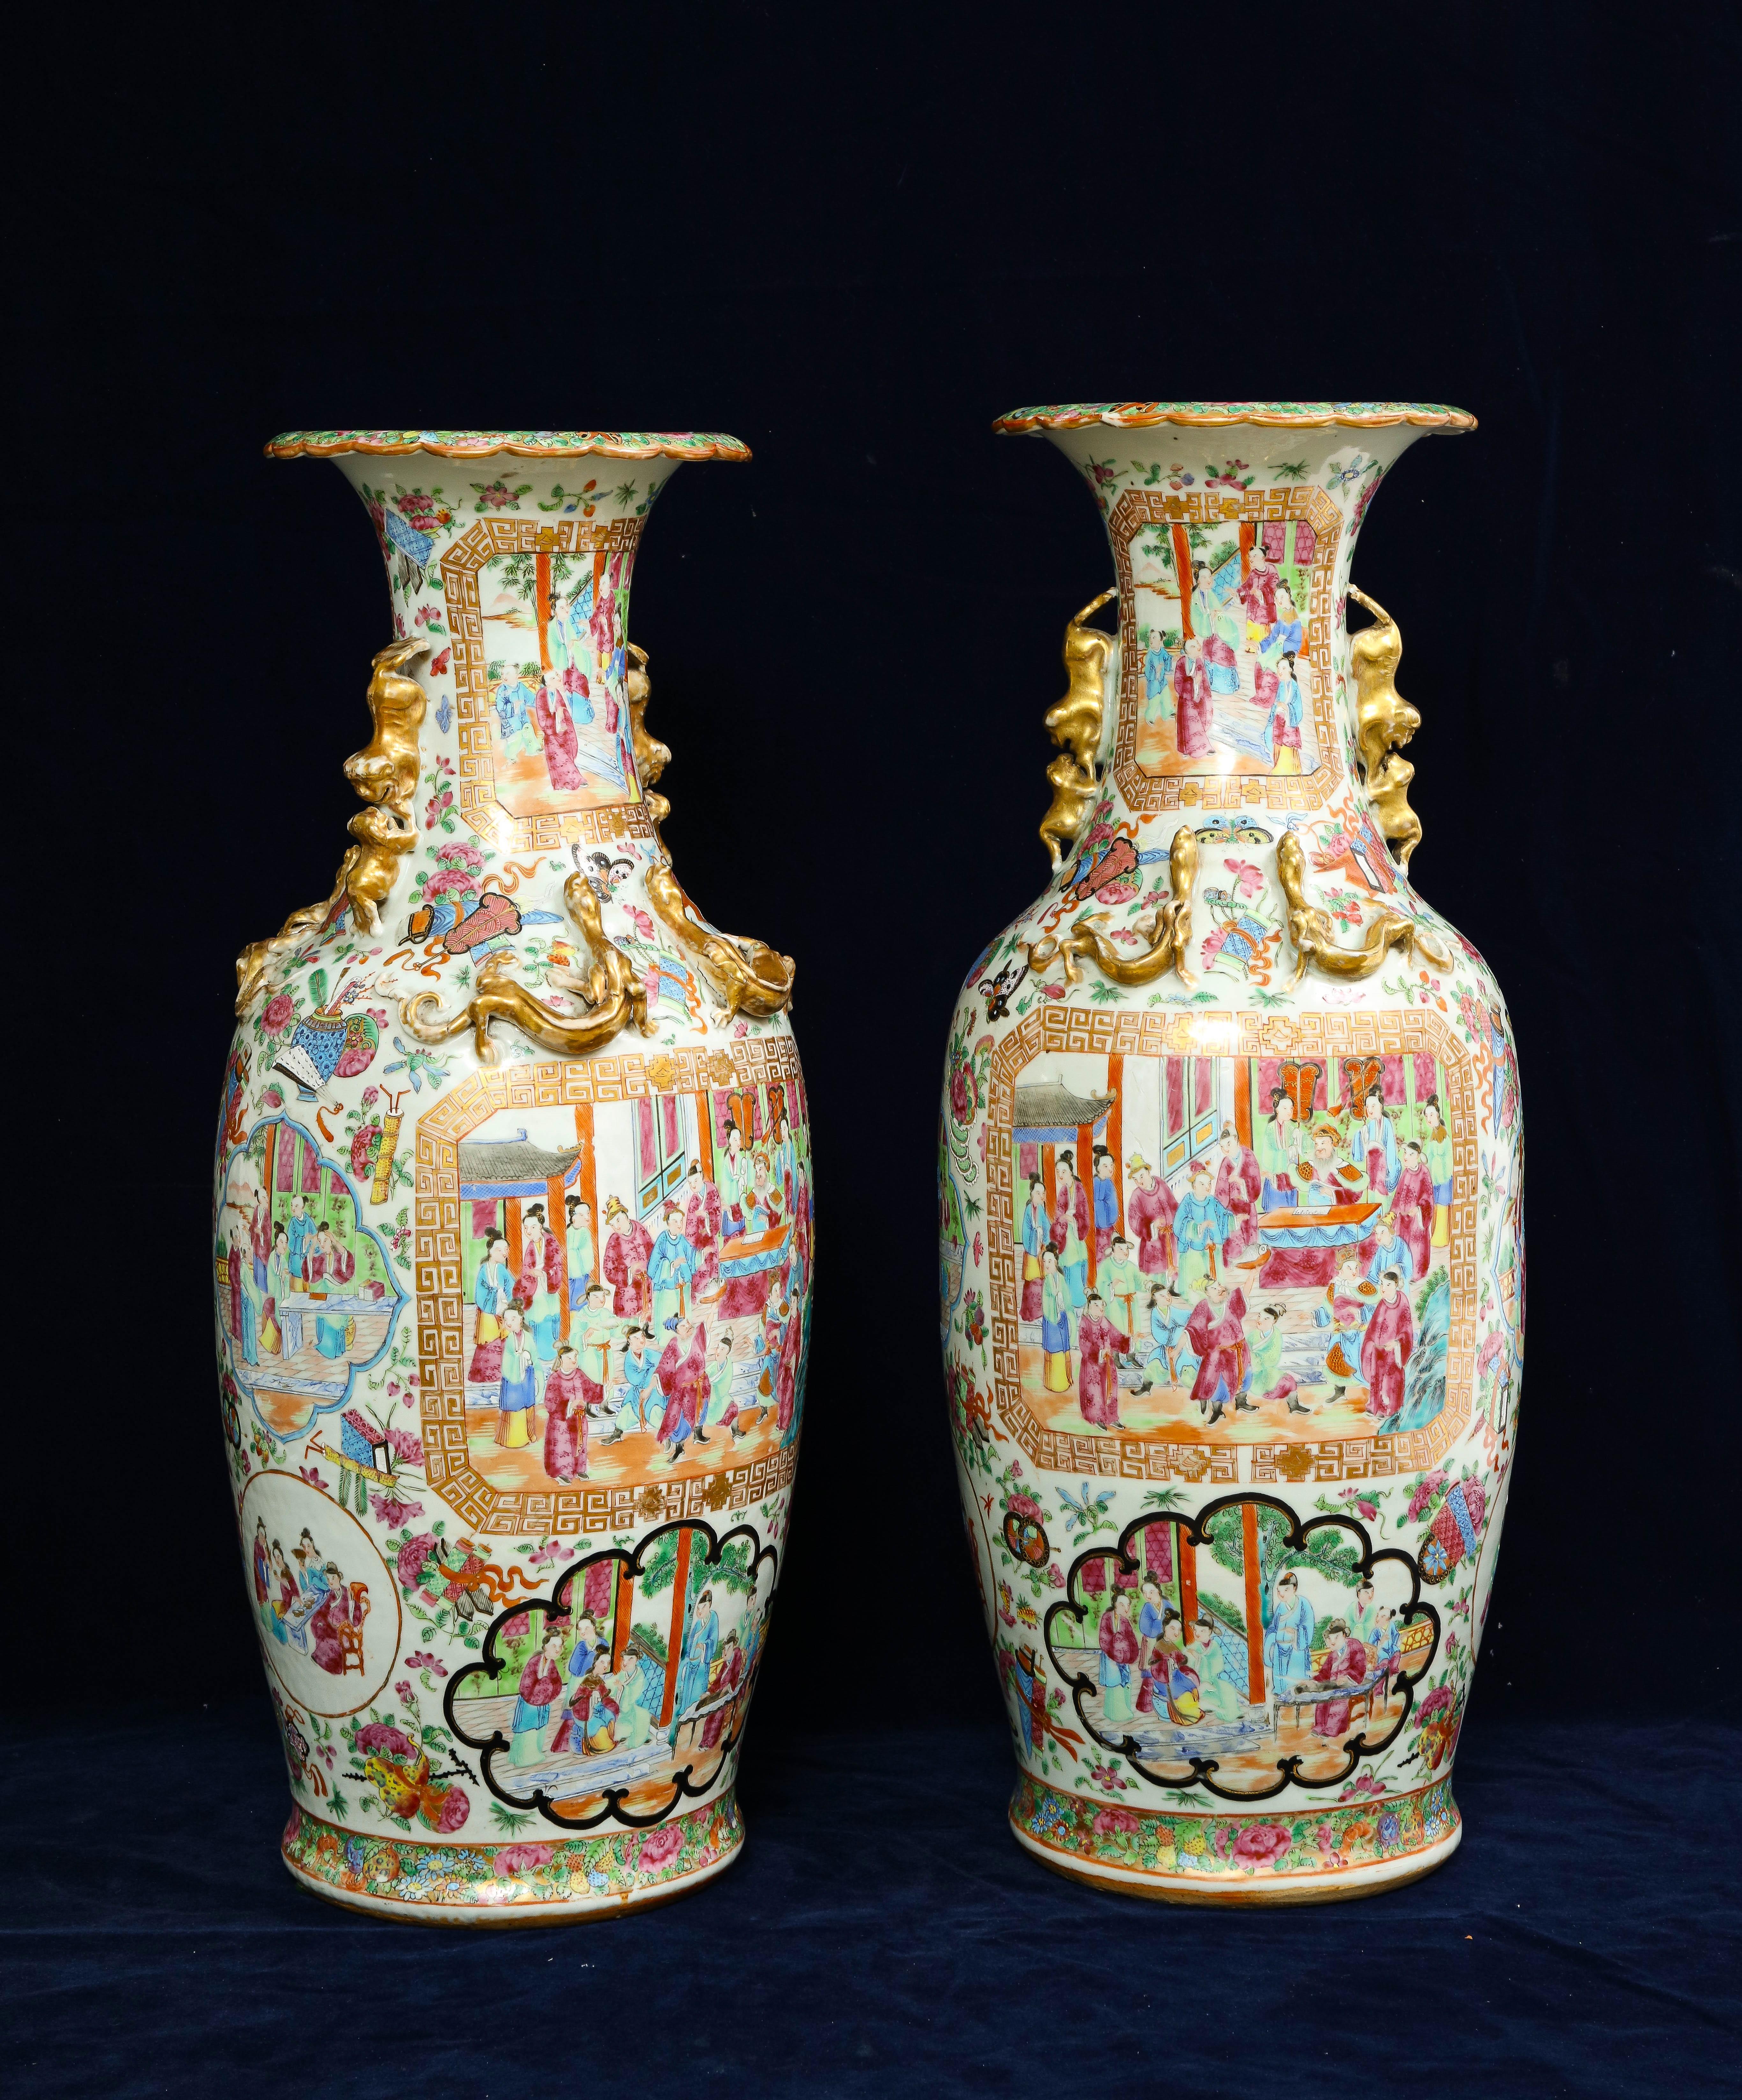 A fine pair of 19th century Chinese Rose Medallion Porcelain vases. Each is of an ovoid baluster form with a floriform mouth which is highly decorated with flowers and butterflies. The body is beautifully hand-painted with a multitude of figural